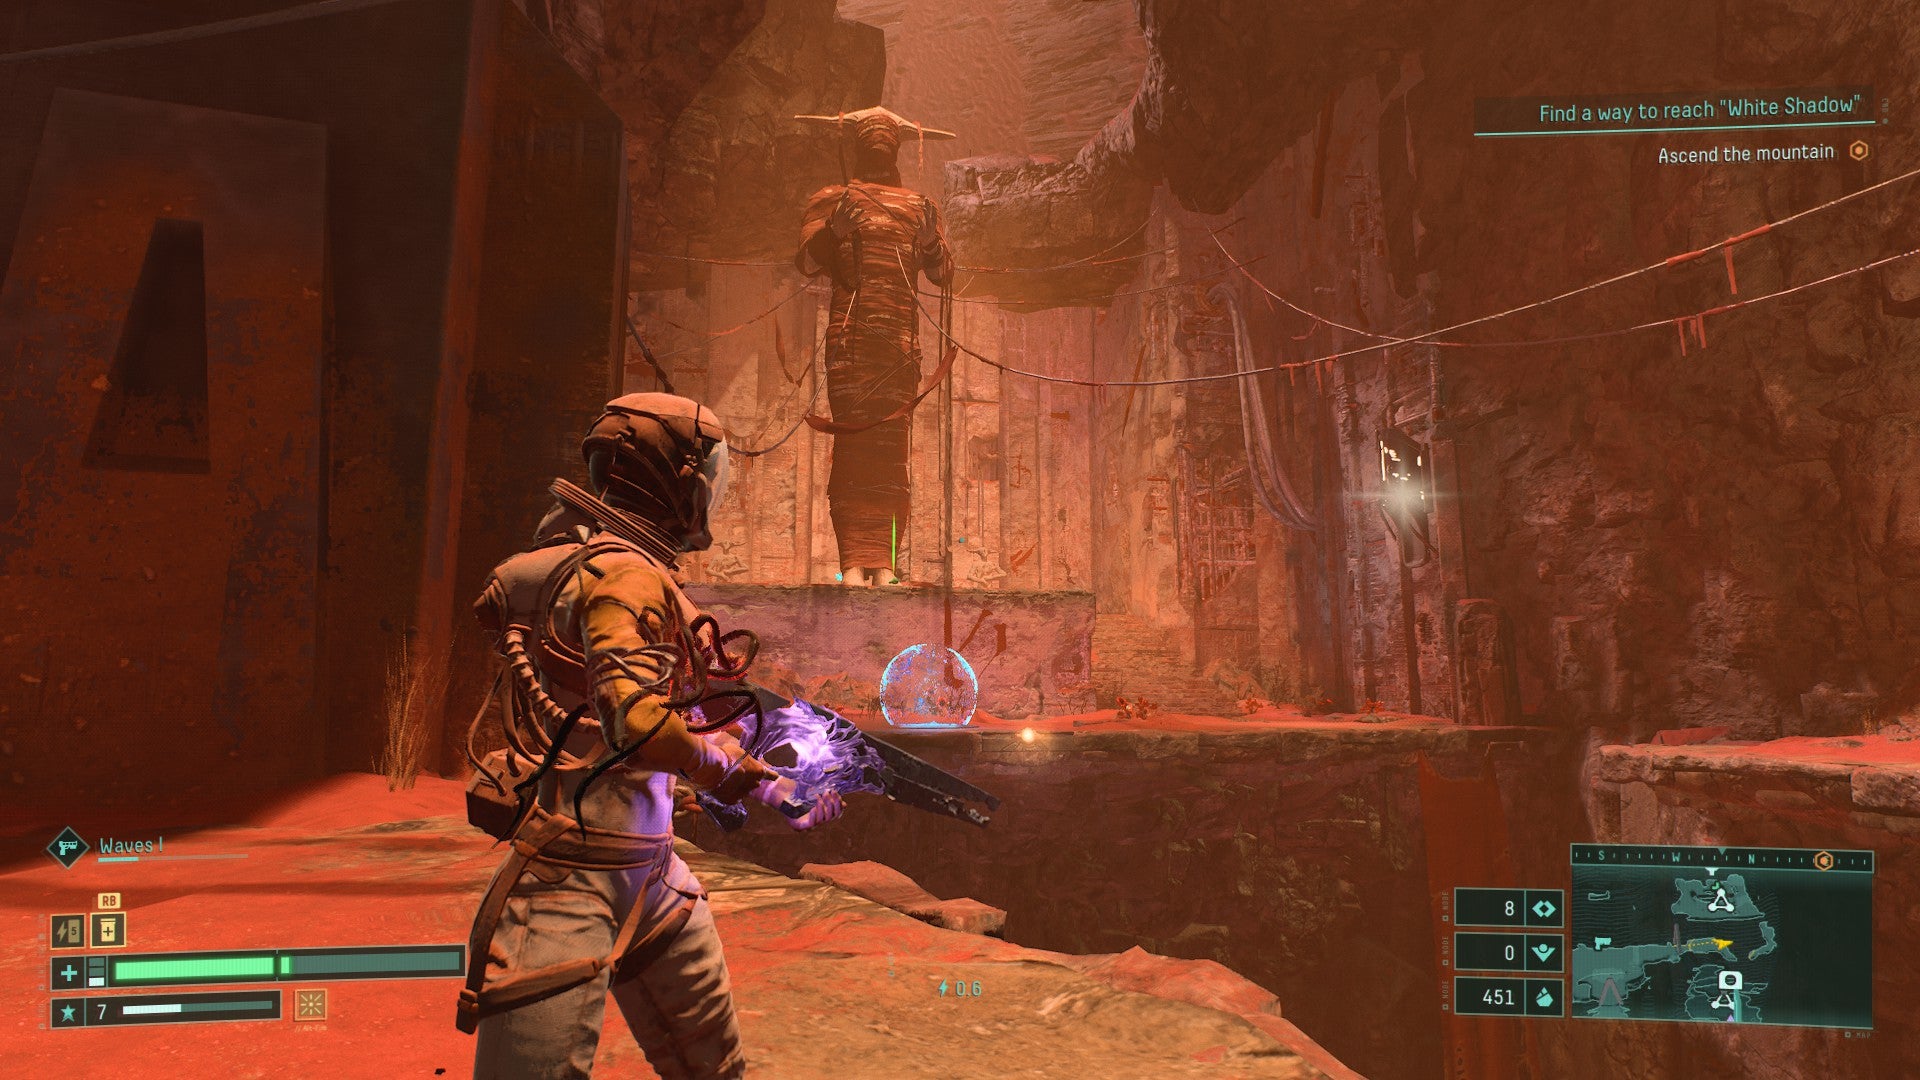 A Returnal screenshot shows Selene next to a deep gorge with a giant statue in the distance.